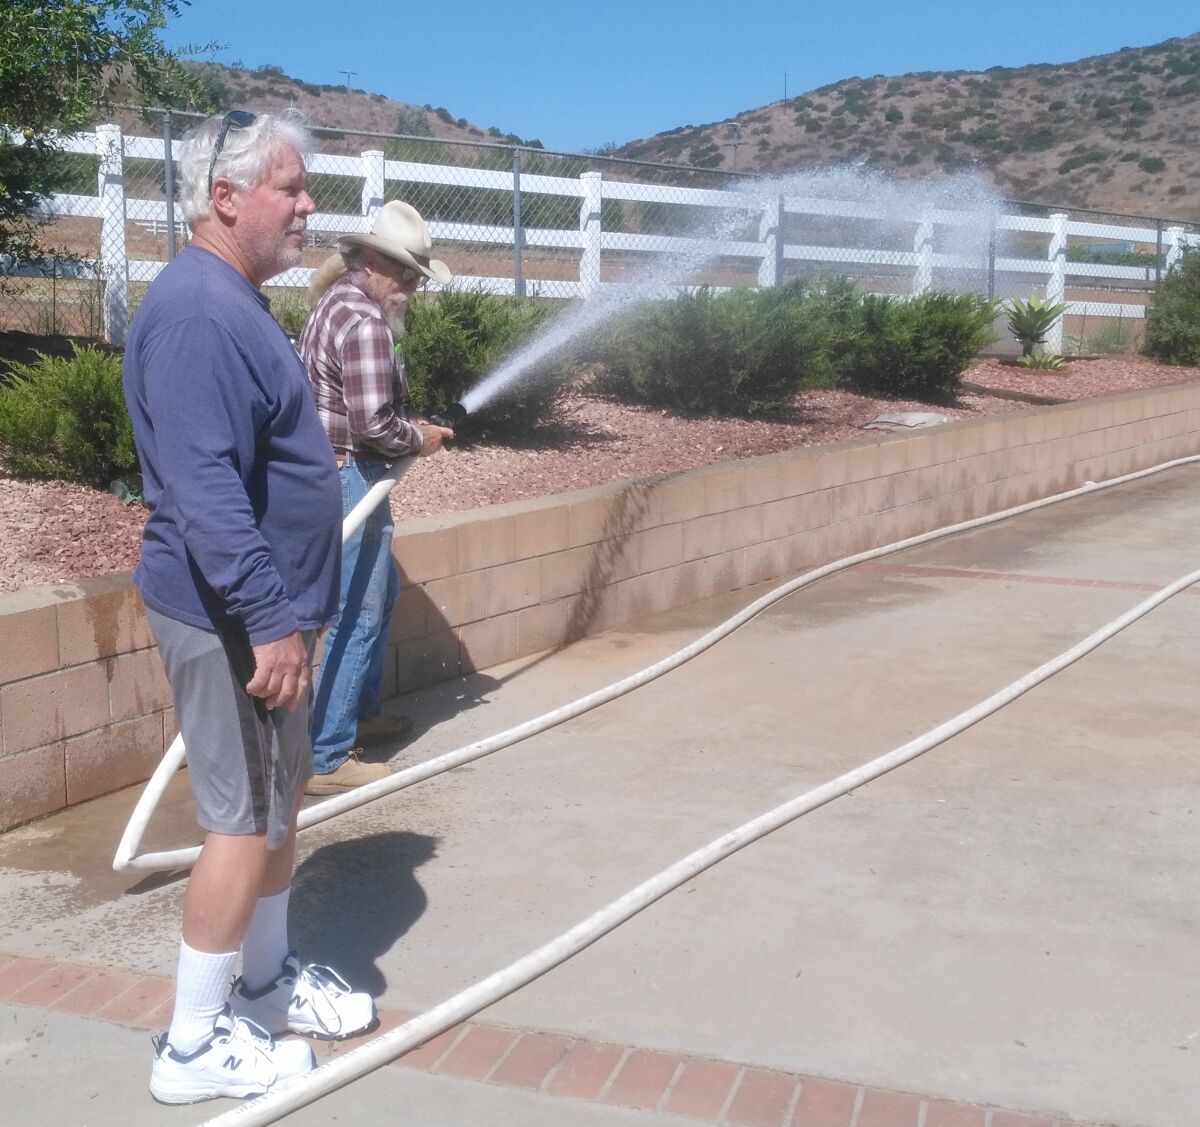 Ramona homeowner Dan Summers, left, talks about safety features at his home while Jim Cooper uses a hose attached to a 5,000-gallon water tank on Summers’ property. Firefighters are able to connect to the hose in a fire emergency.